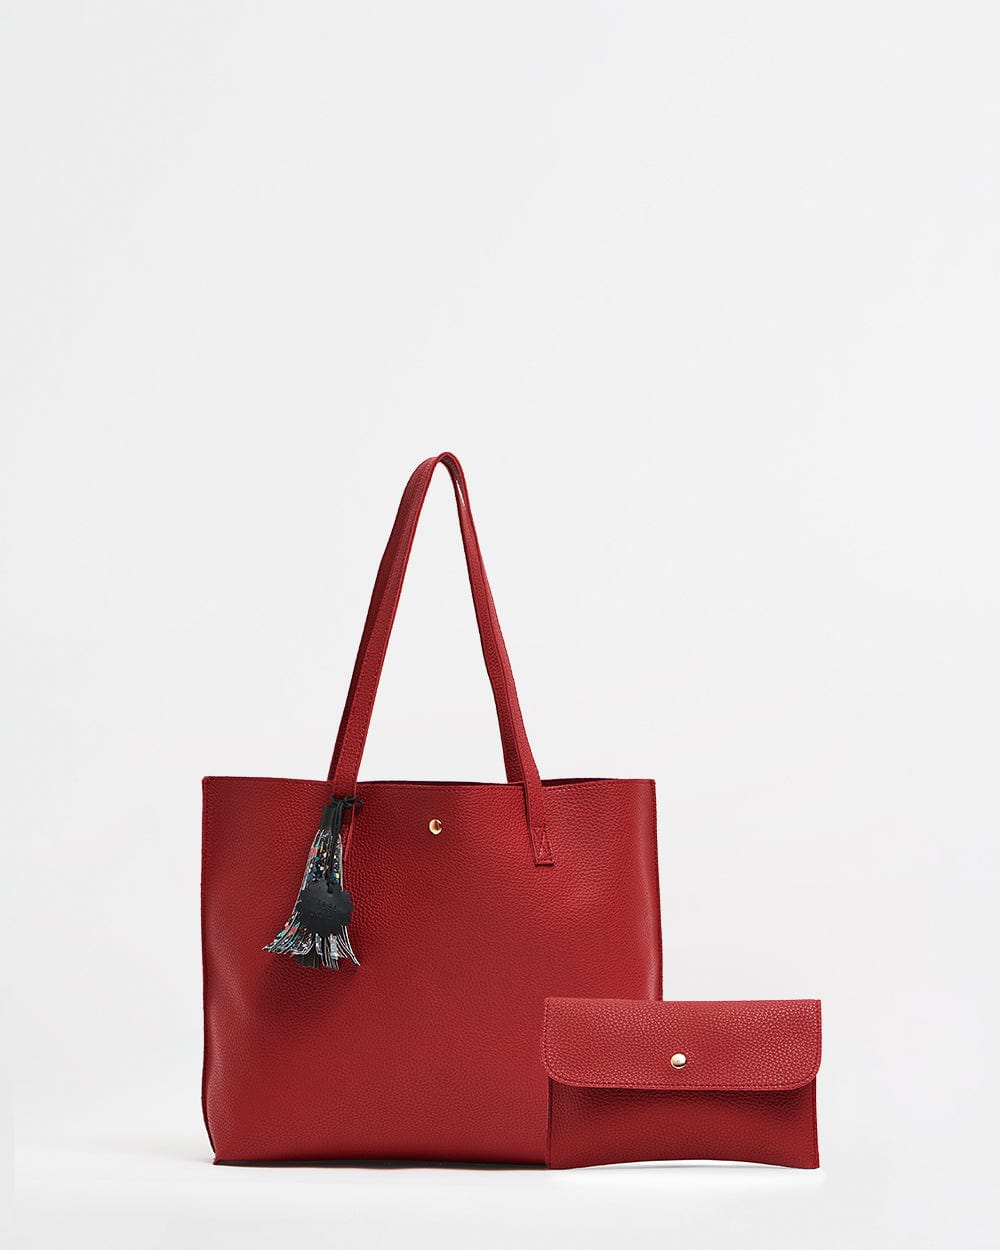 Chumbak Back to office Tote  -Rosewood Maroon